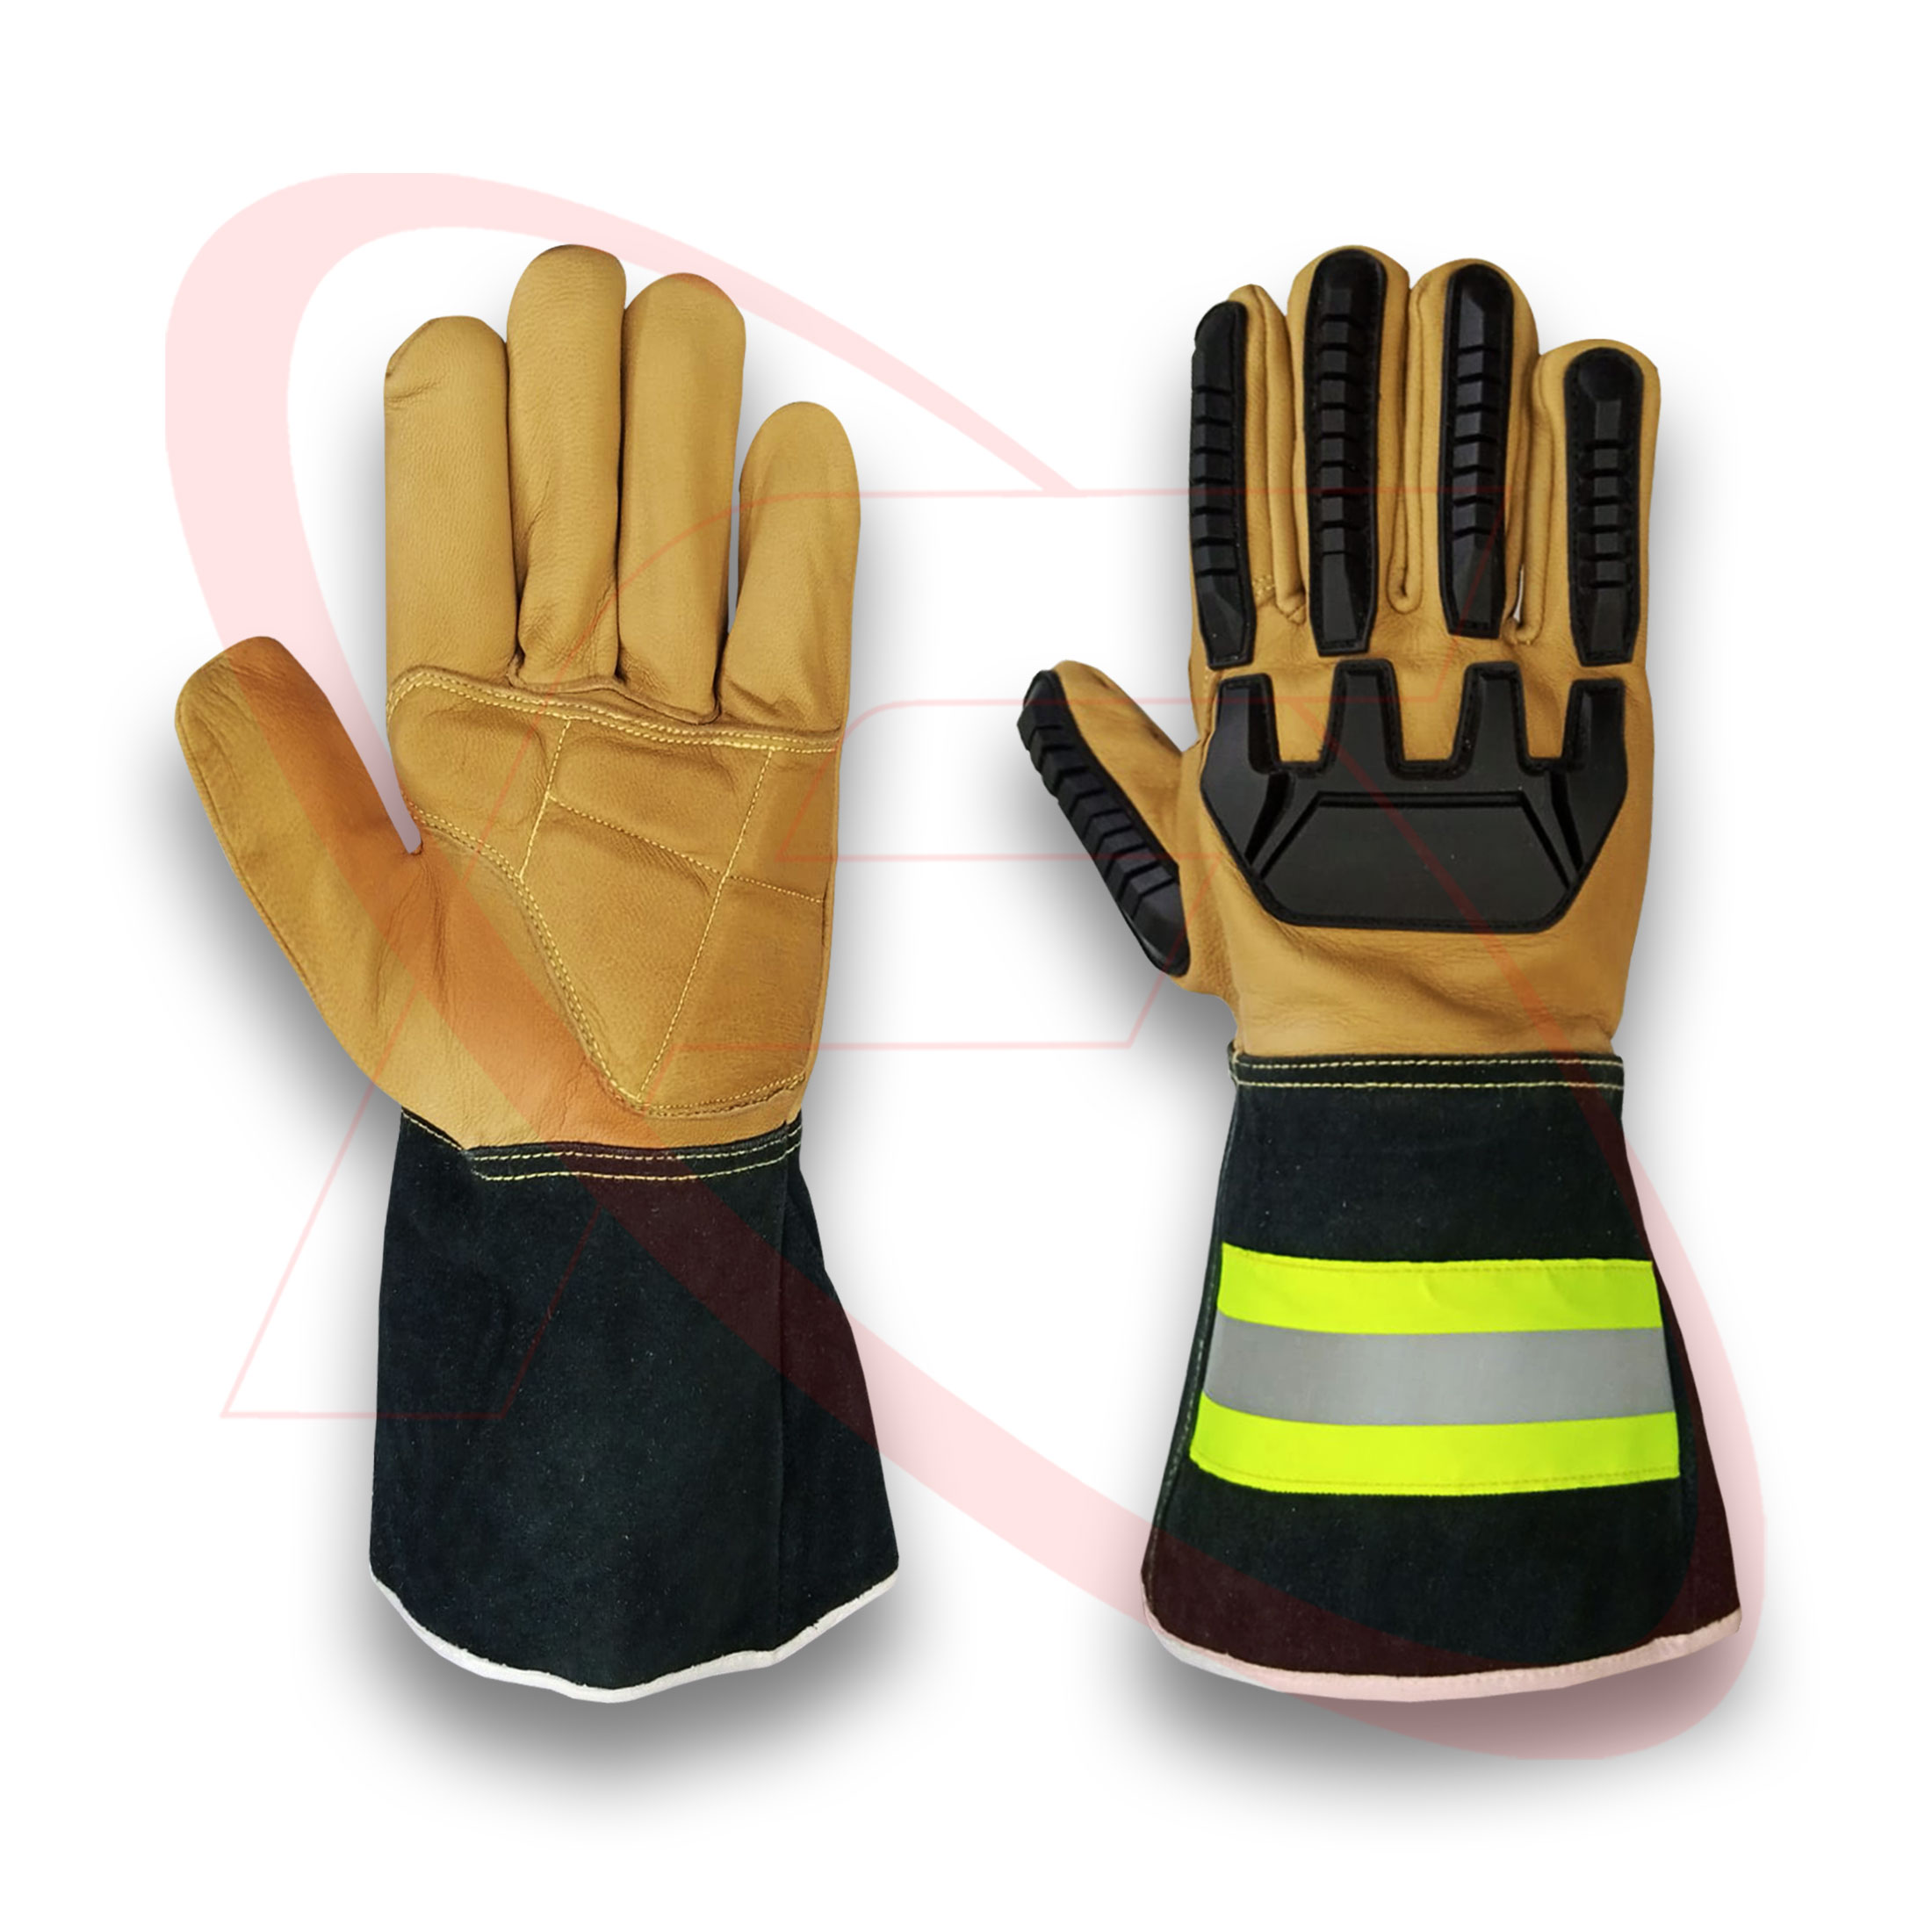 Anti Impact Gloves in Goatskin Leather Tig Welding Gloves For Safety Work Wholesale Impact TPR Cut Resistant Driver Gloves